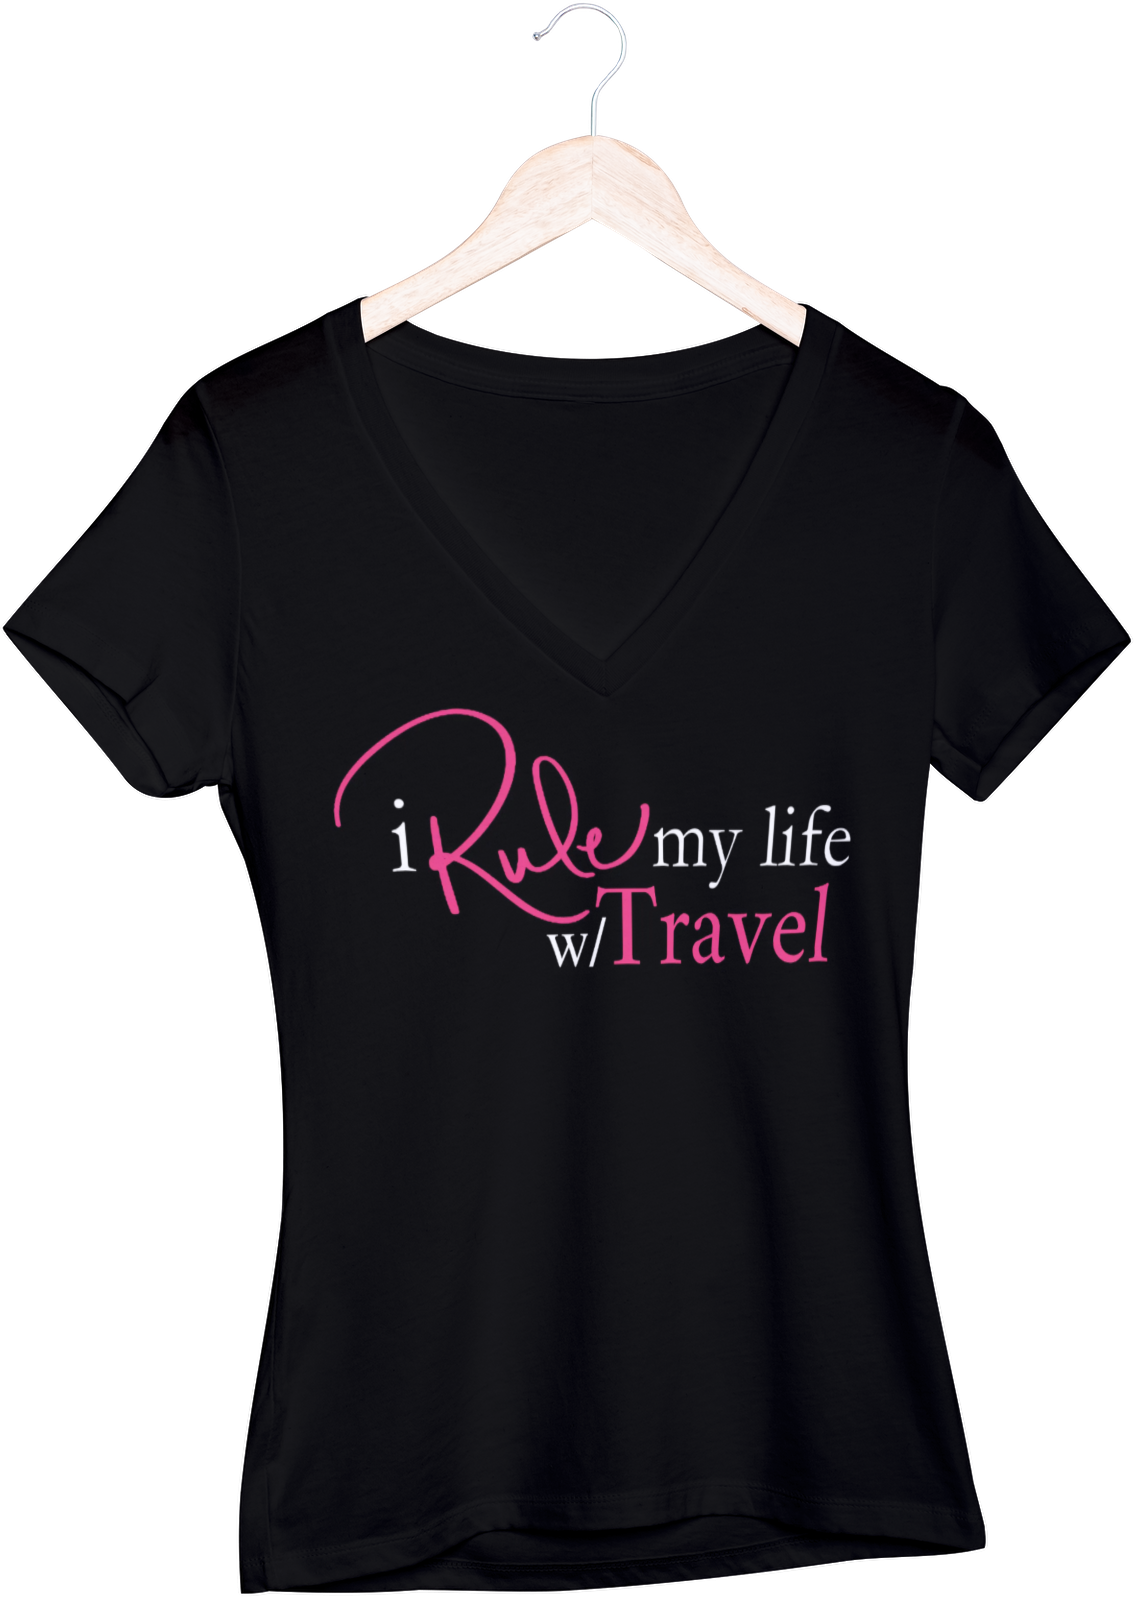 I Rule My Life Collection Bundle @ 15% off And Free Shipping!